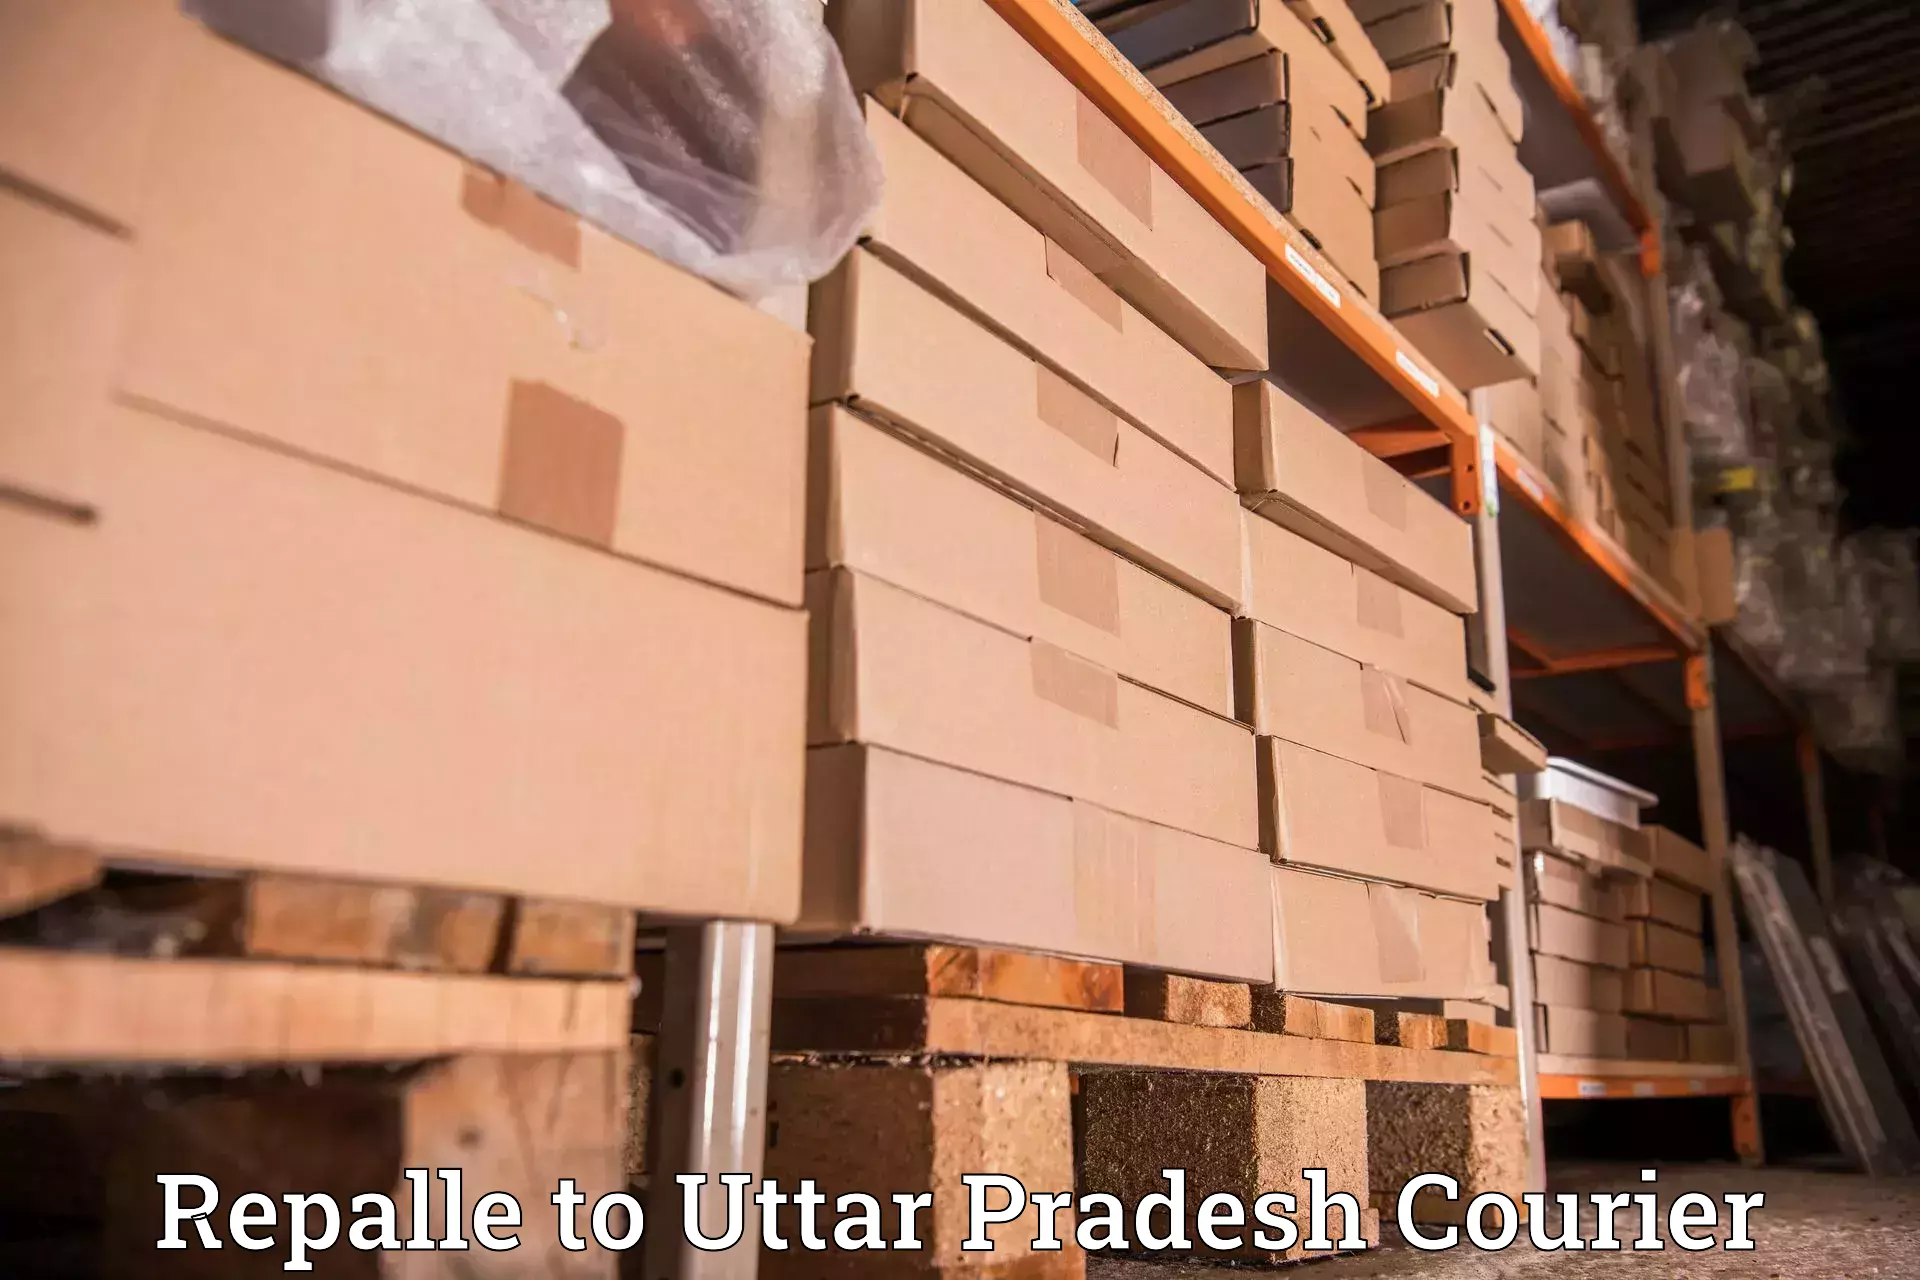 Custom courier packaging in Repalle to Laharpur